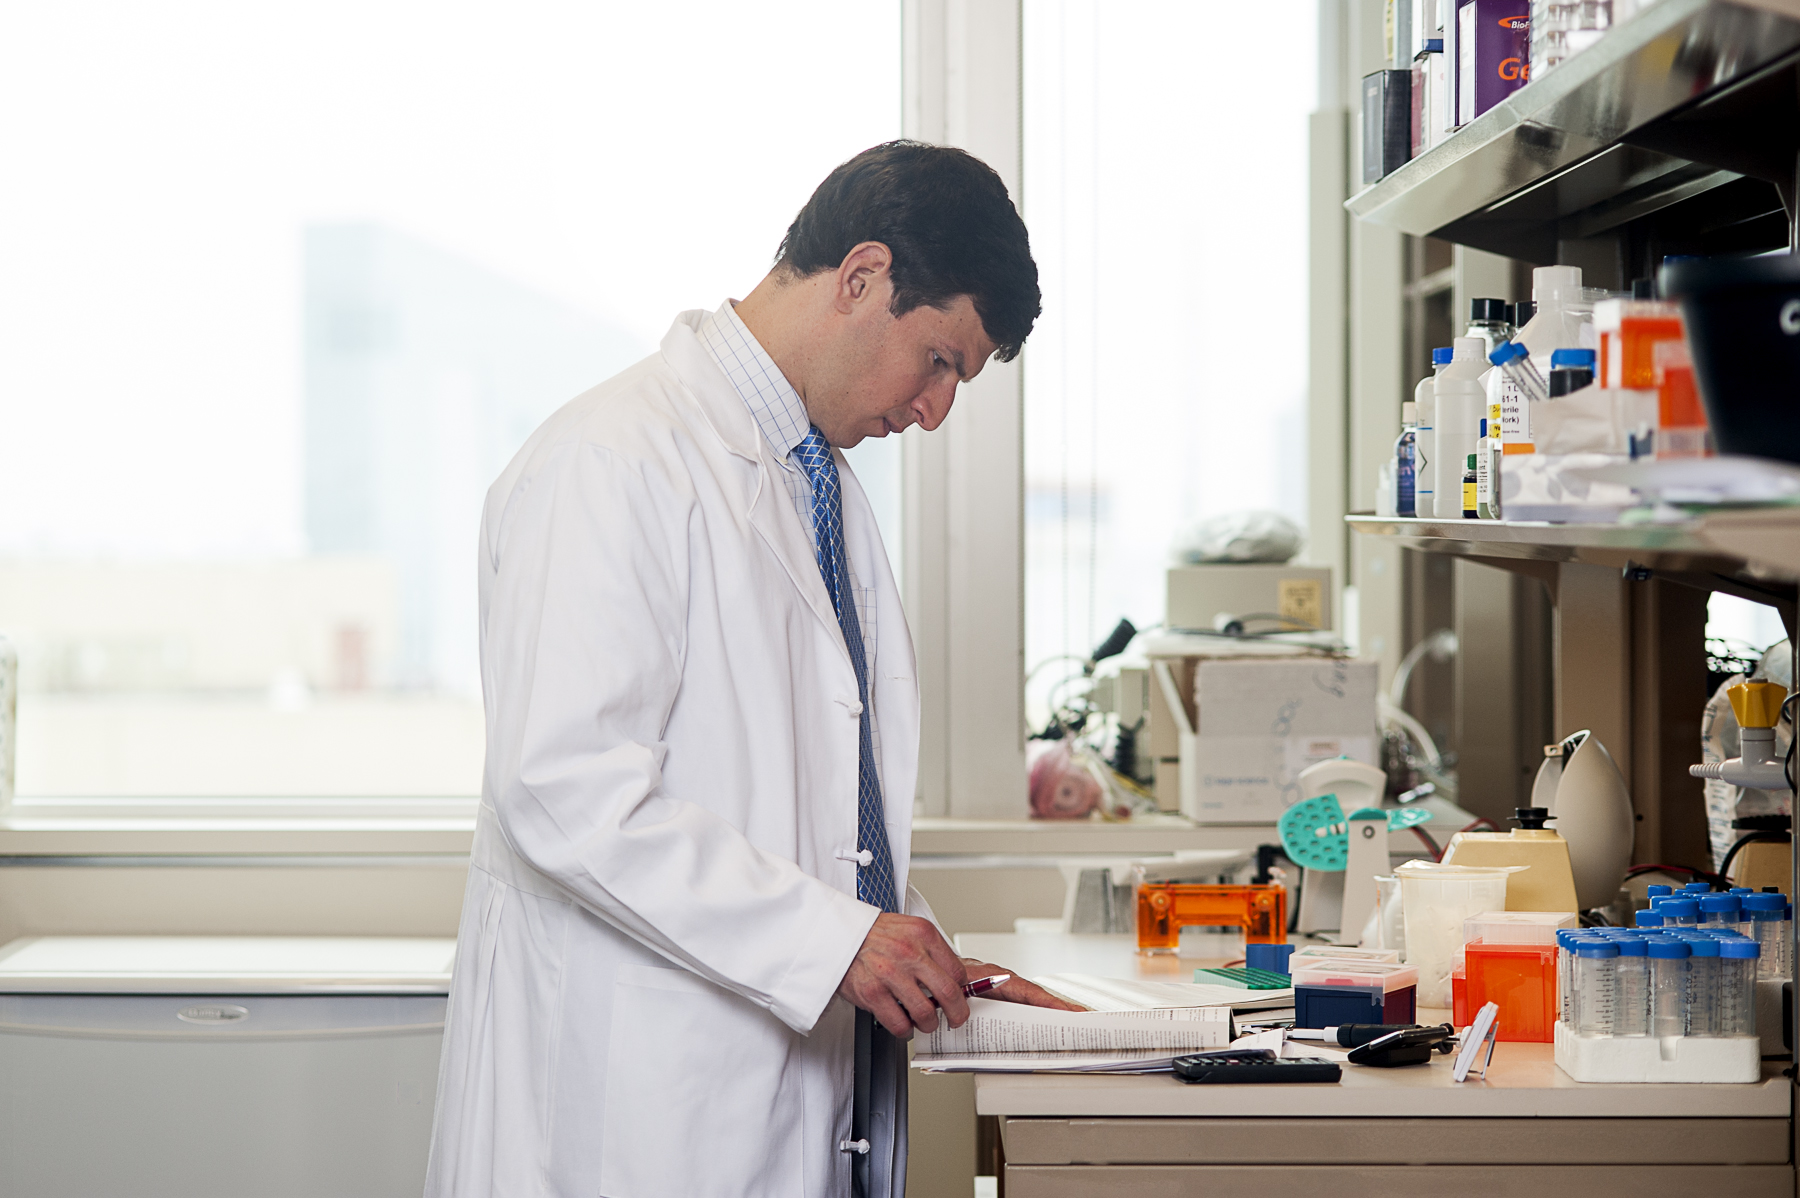 Person in a white lab coat standing at a lab bench looking at a book. Scientific materials are on the table next to and above the person.